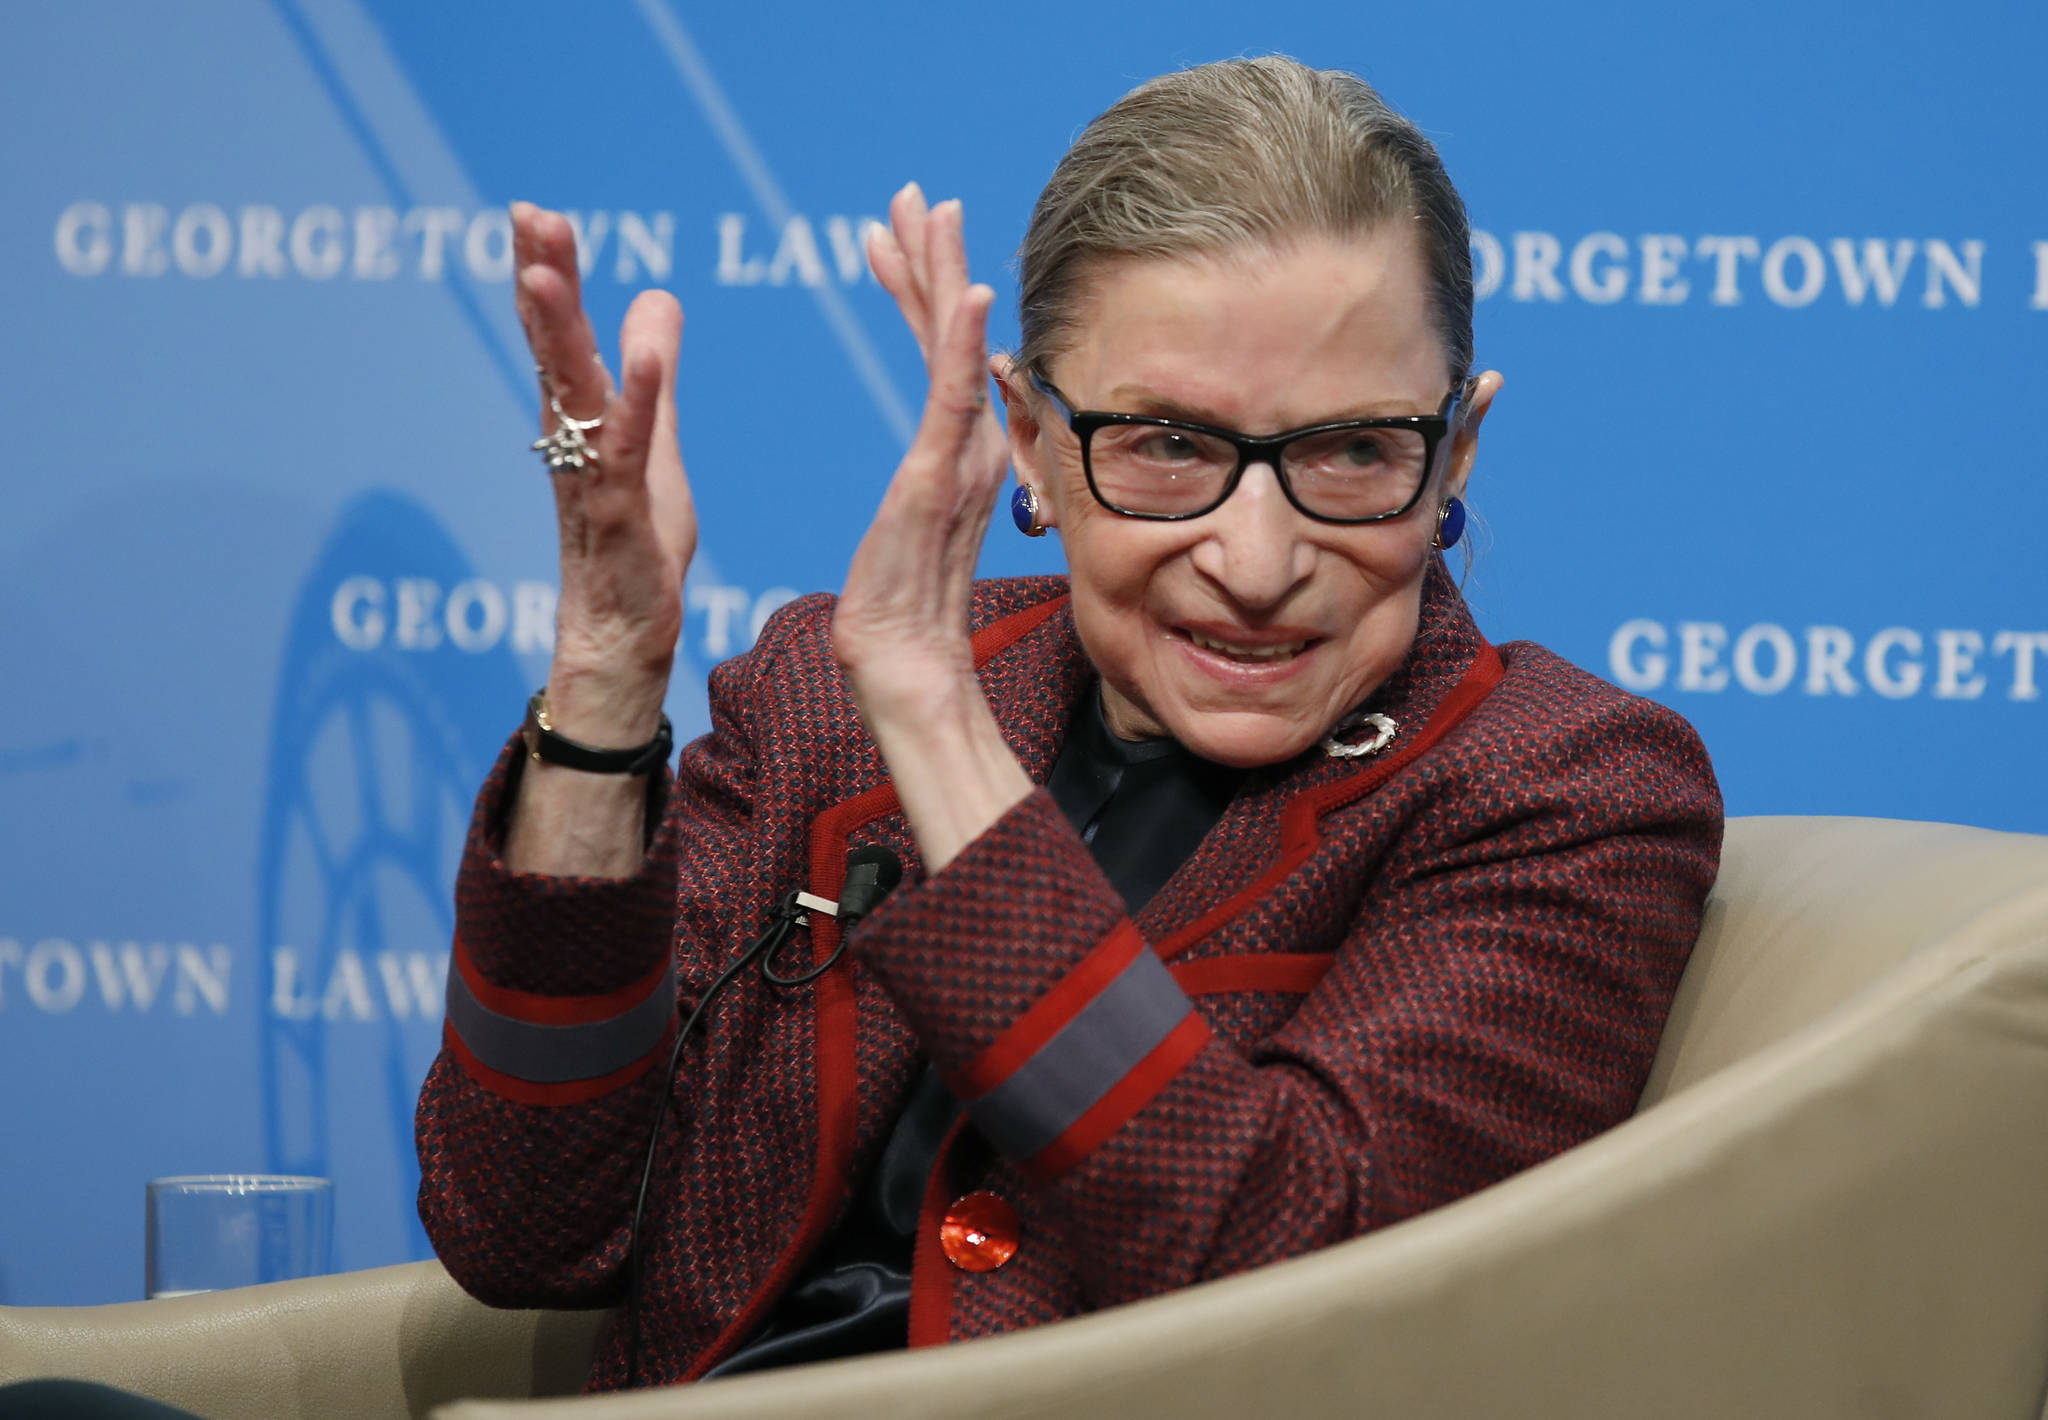 Supreme Court Justice Ruth Bader Ginsburg applauds after a performance in her honor after she spoke about her life and work during a discussion at Georgetown Law School in Washington in April 2018. The Supreme Court says Ginsburg has died of metastatic pancreatic cancer at age 87. (AP Photo/Alex Brandon)